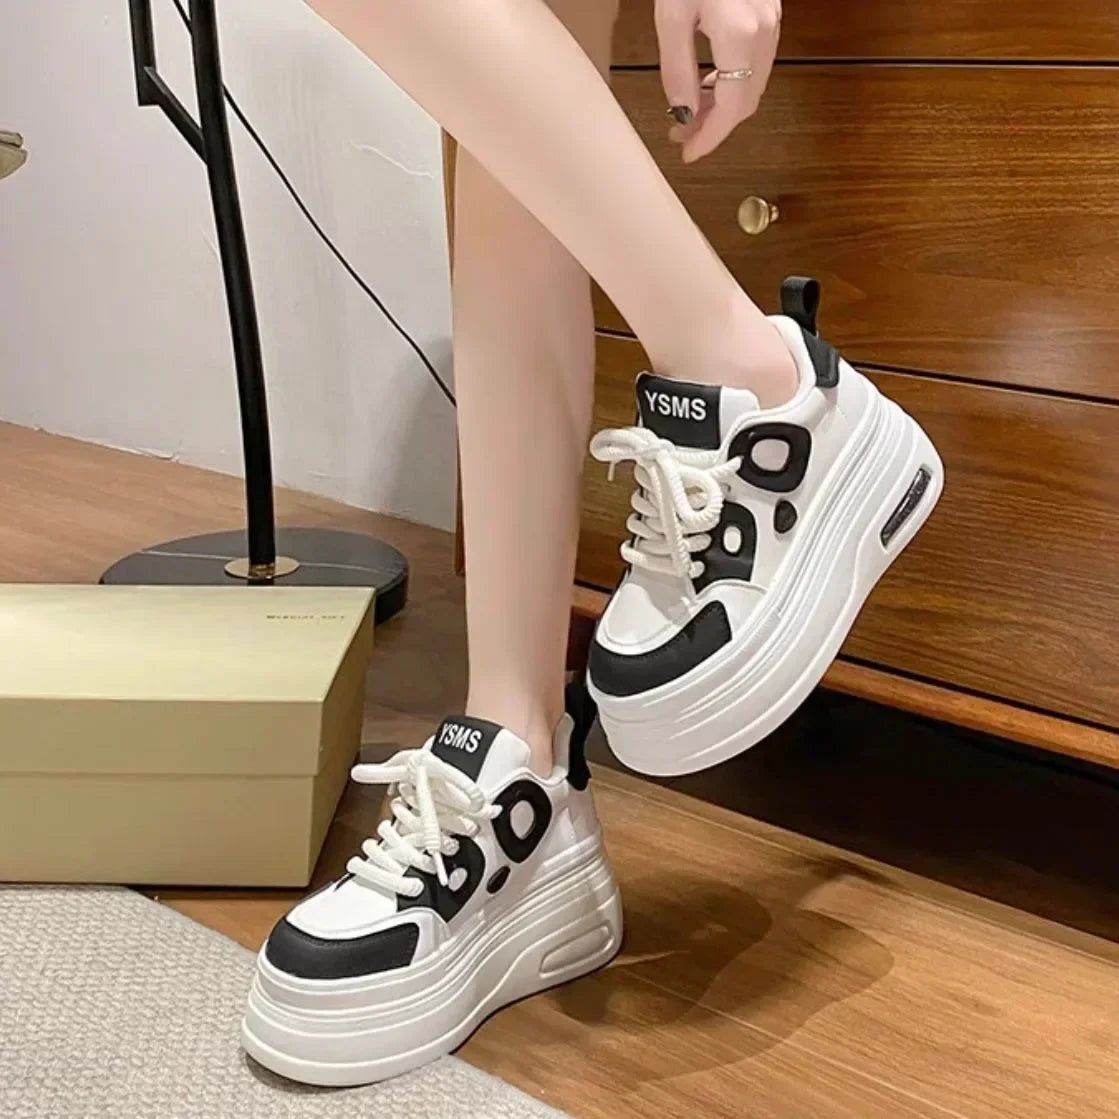 Chic Platform Sneakers for Women - Trendy, Comfortable and Stylish - true-deals-club